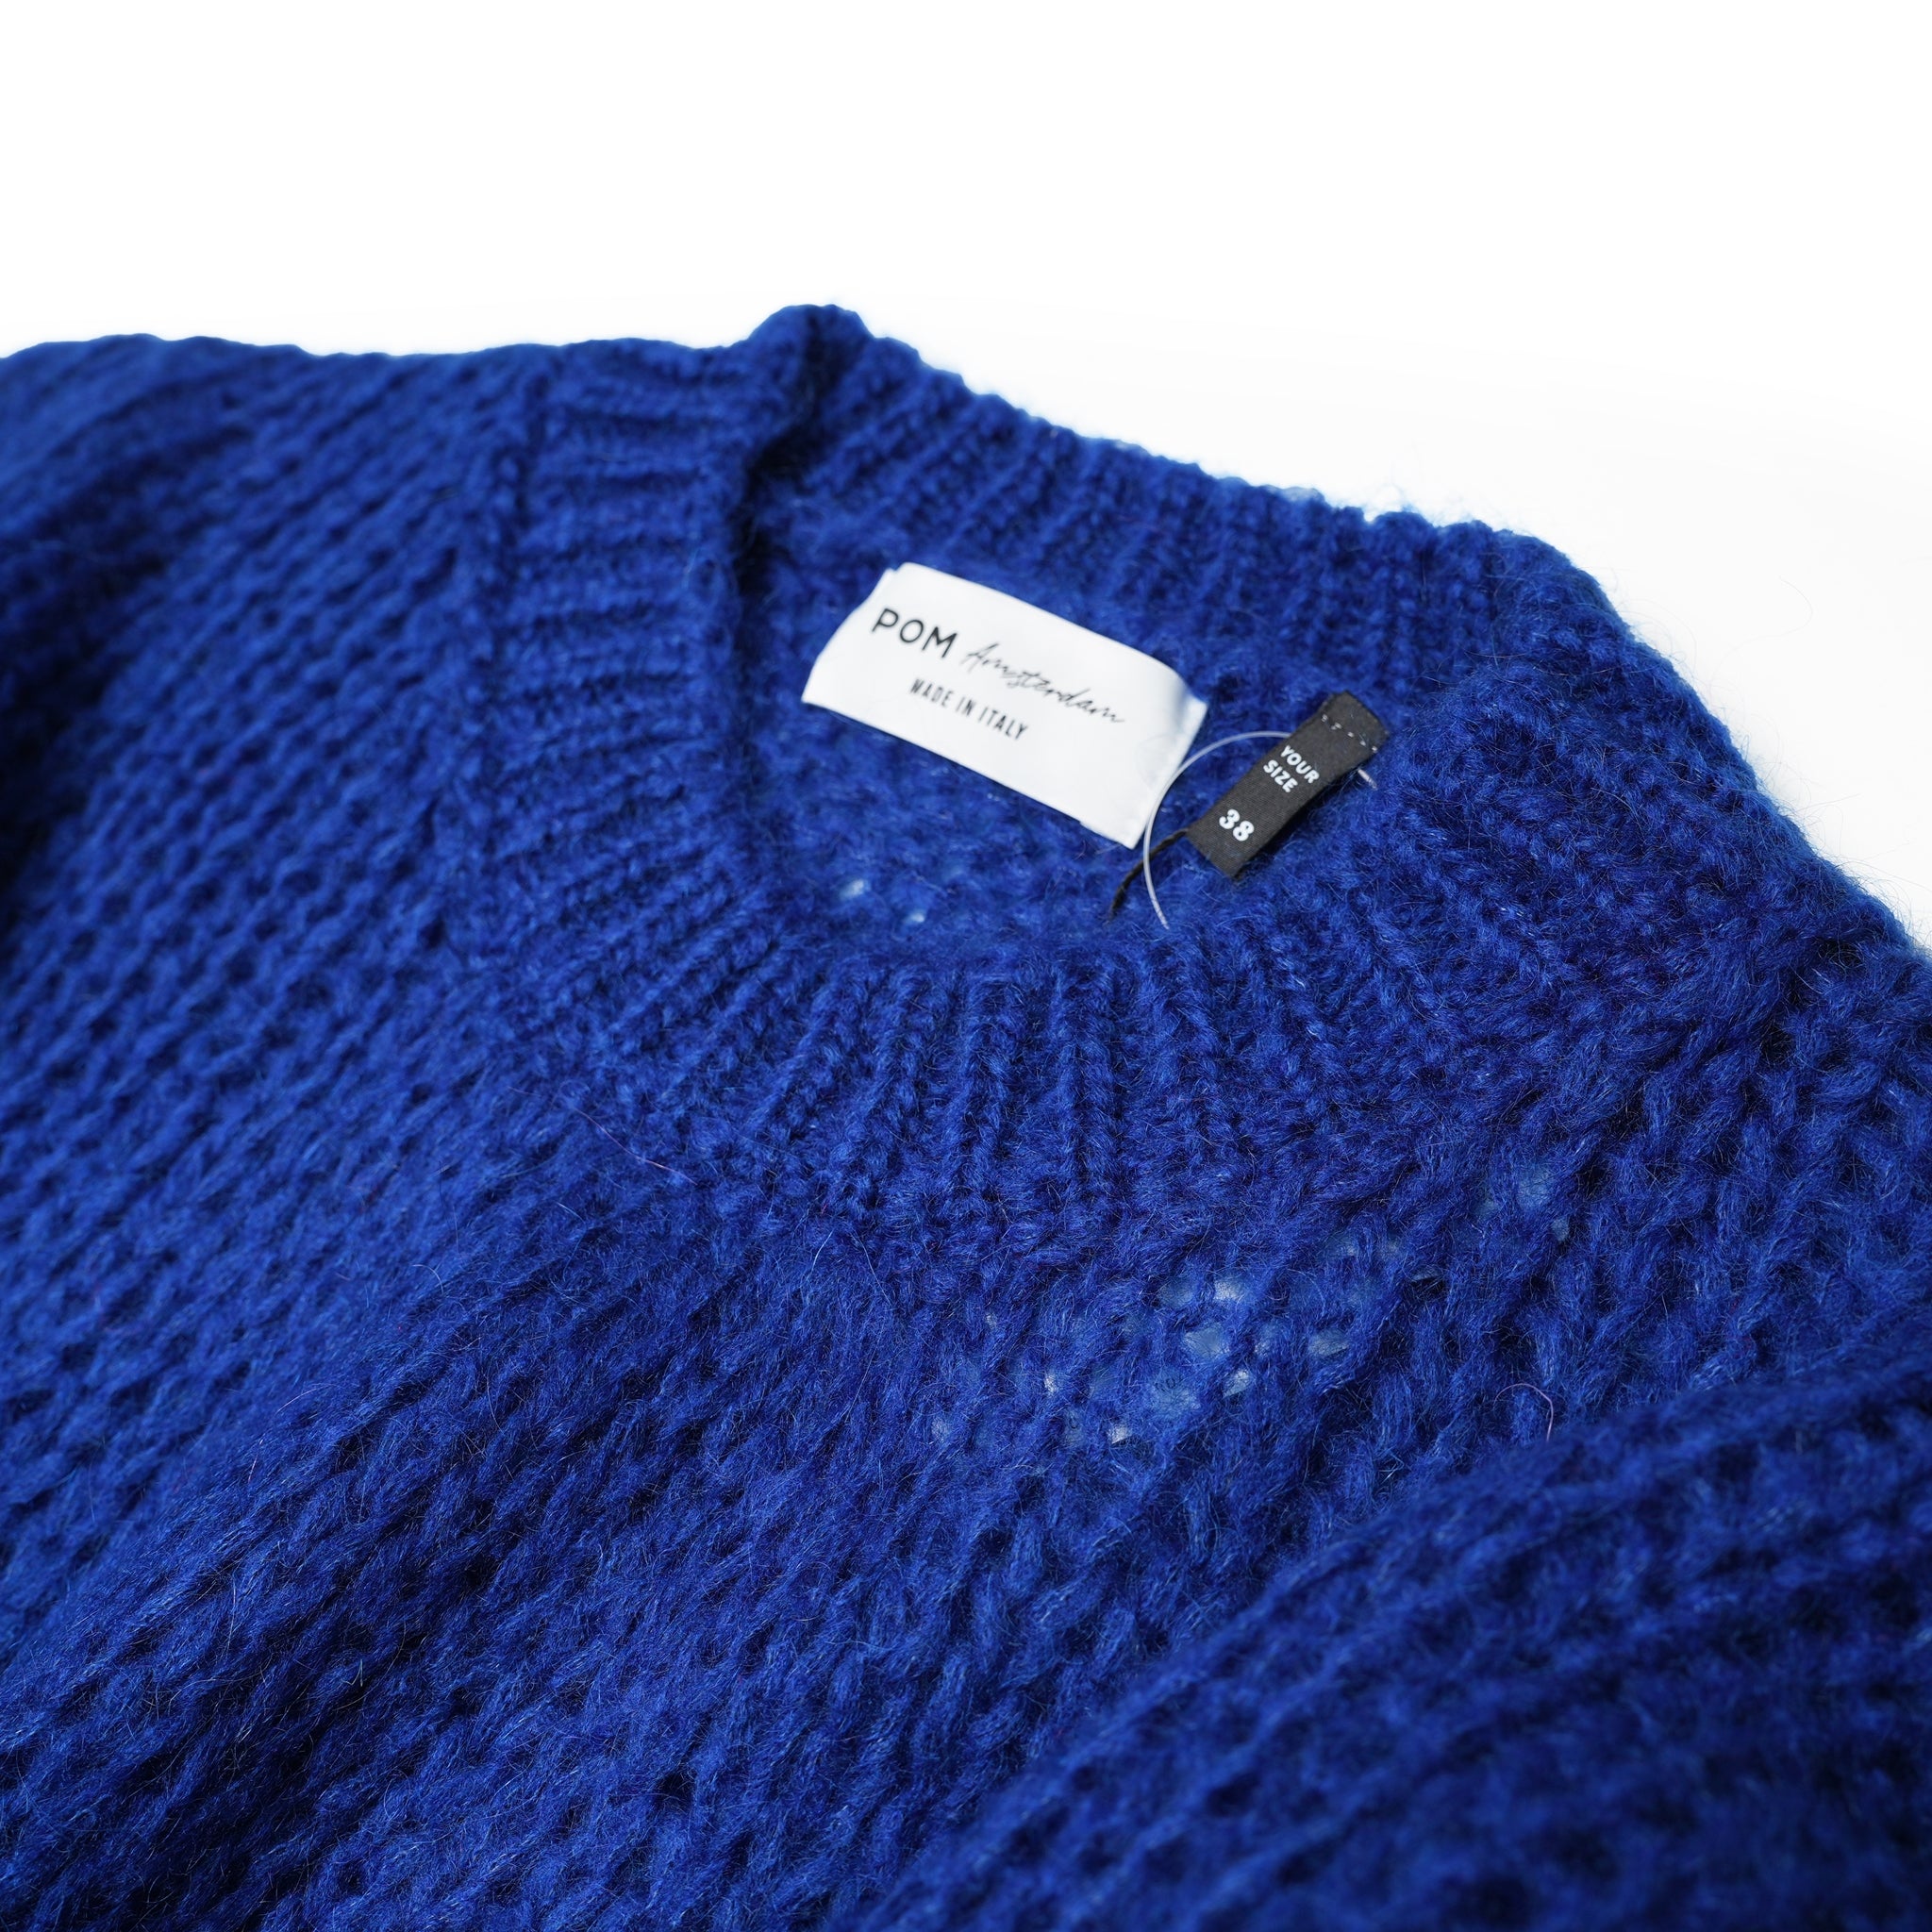 No:SP7494 | Name:PULLOVER | Color:Royal Blue【POM AMSTERDAM_ポムアムステルダム】